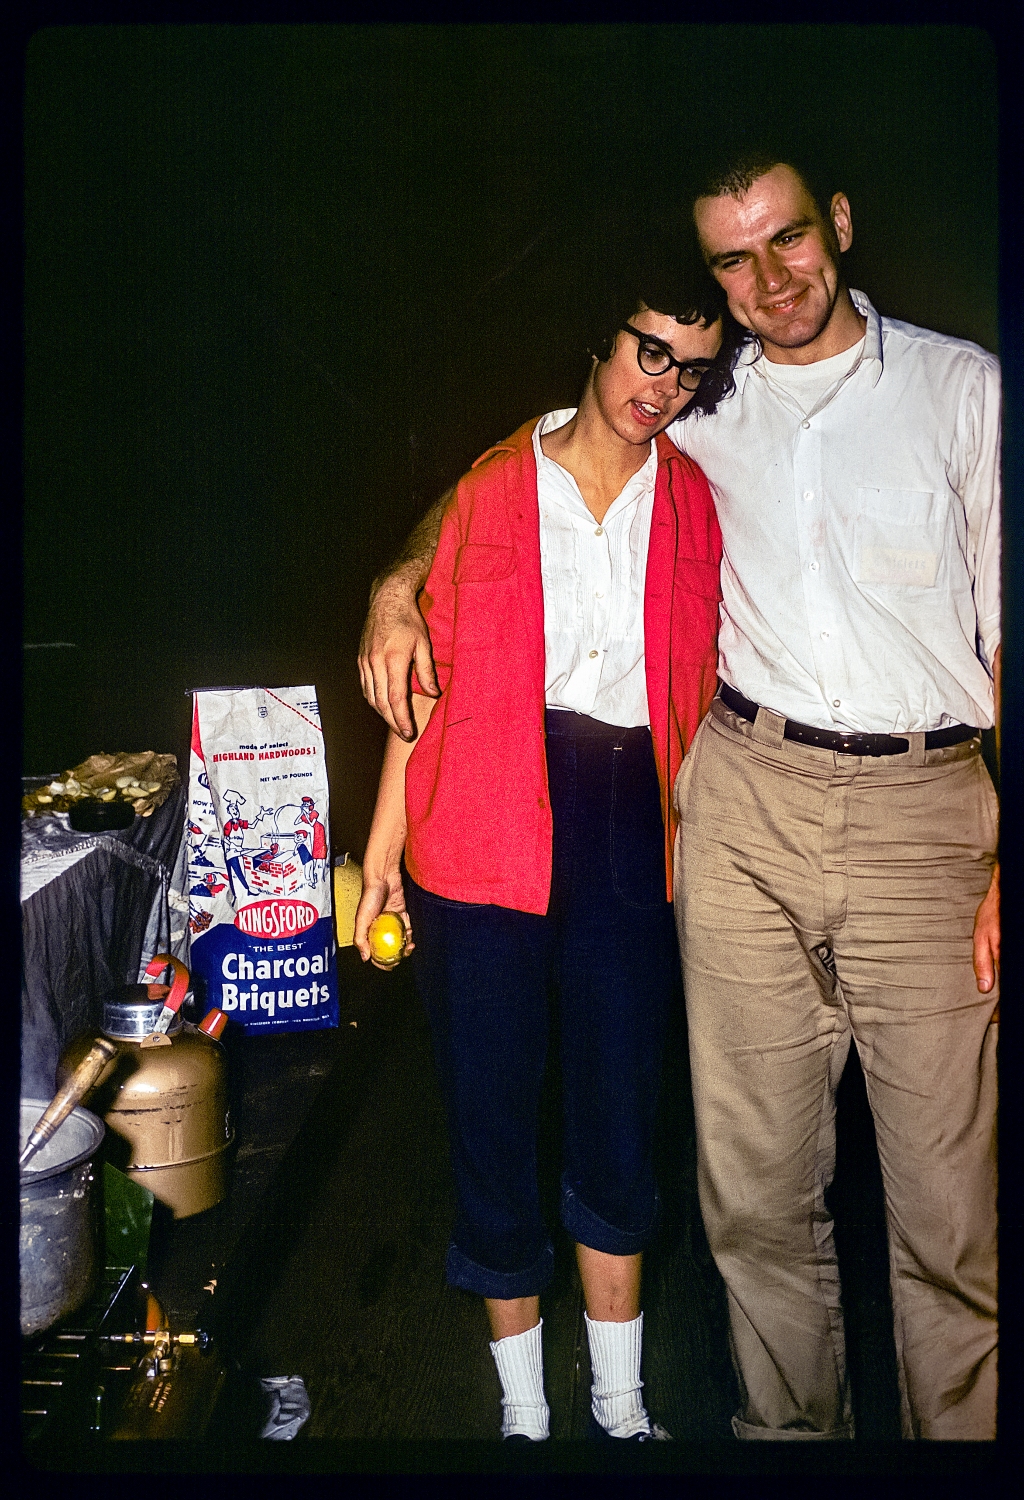 Photo labeled "Me and McCabe" from 1960, the year Bob and Dorothy started discussing the possibility of dating.